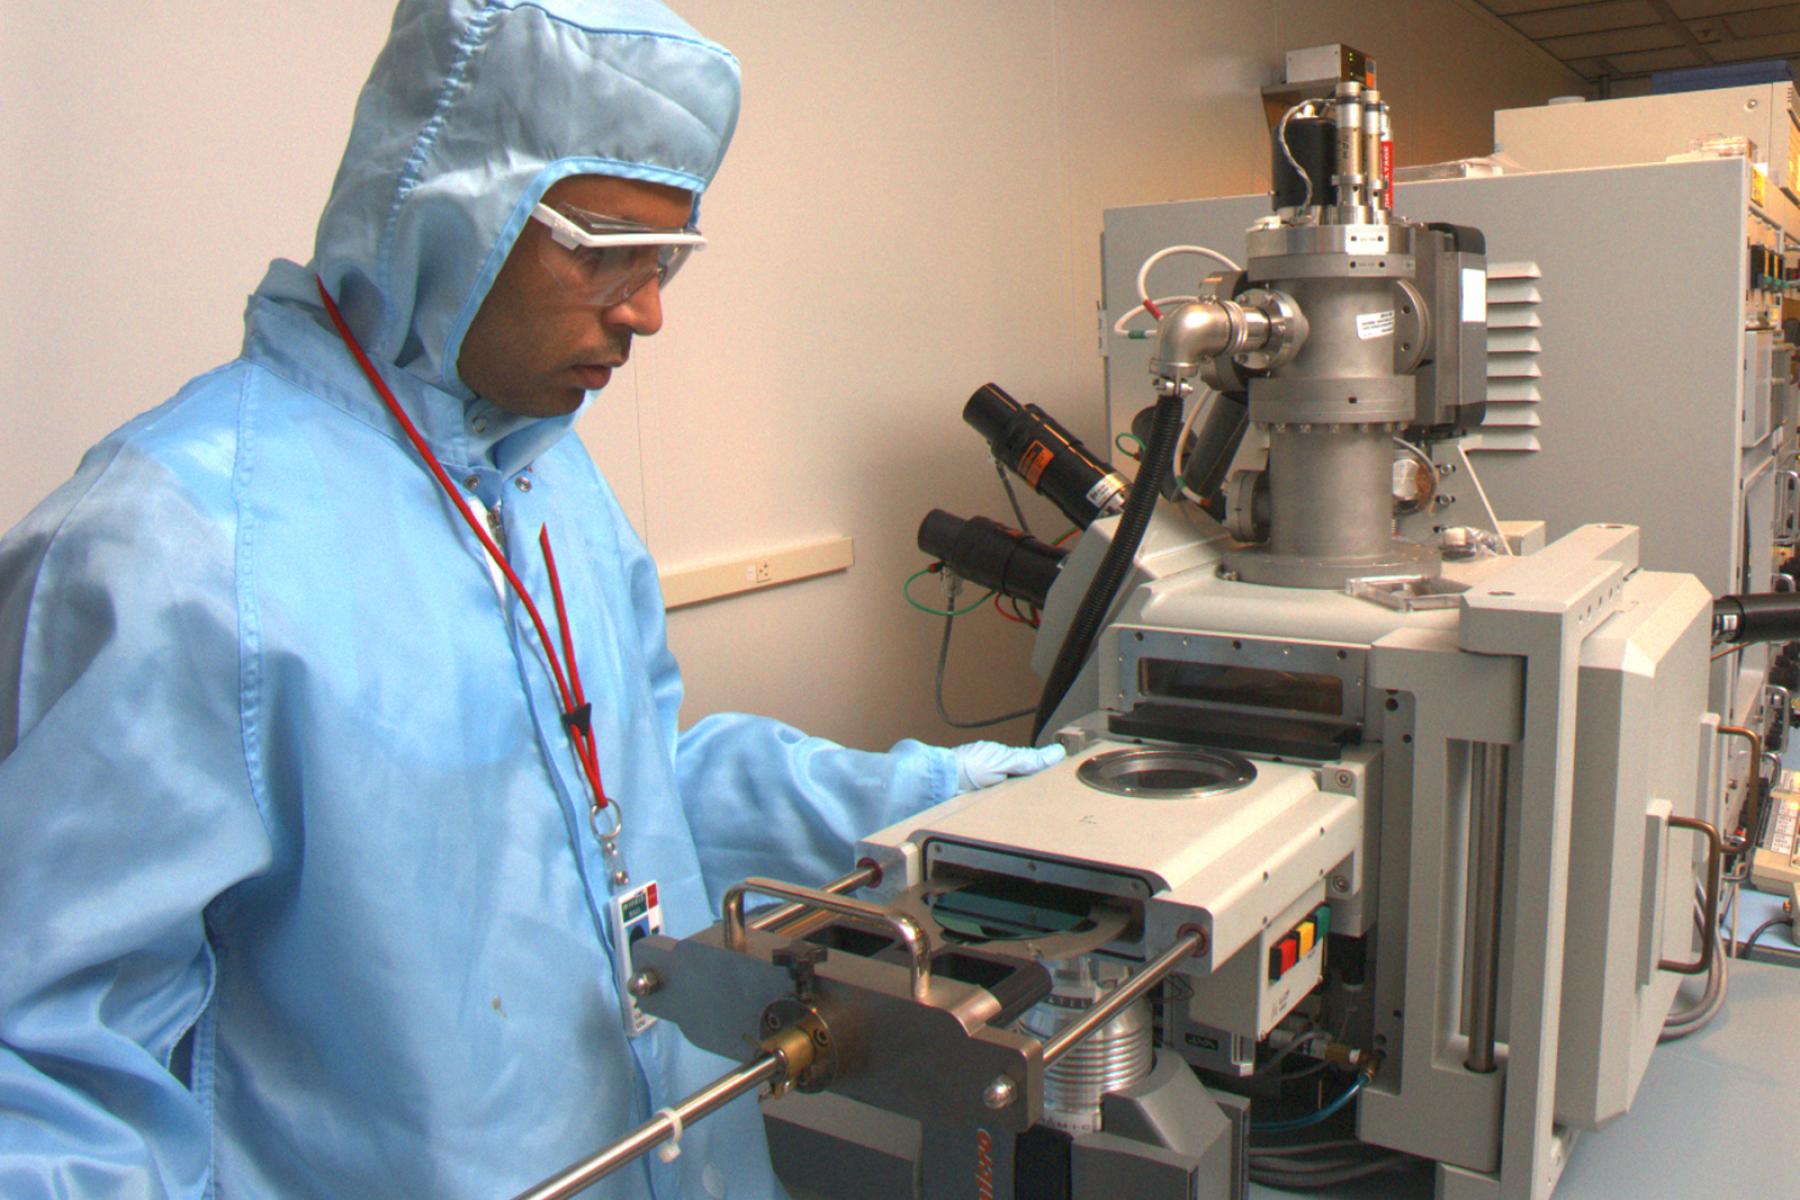 Photograph of scientist working in the Cornell NanoScale Science & Technology Facility. DOWNLOAD ALL FILES